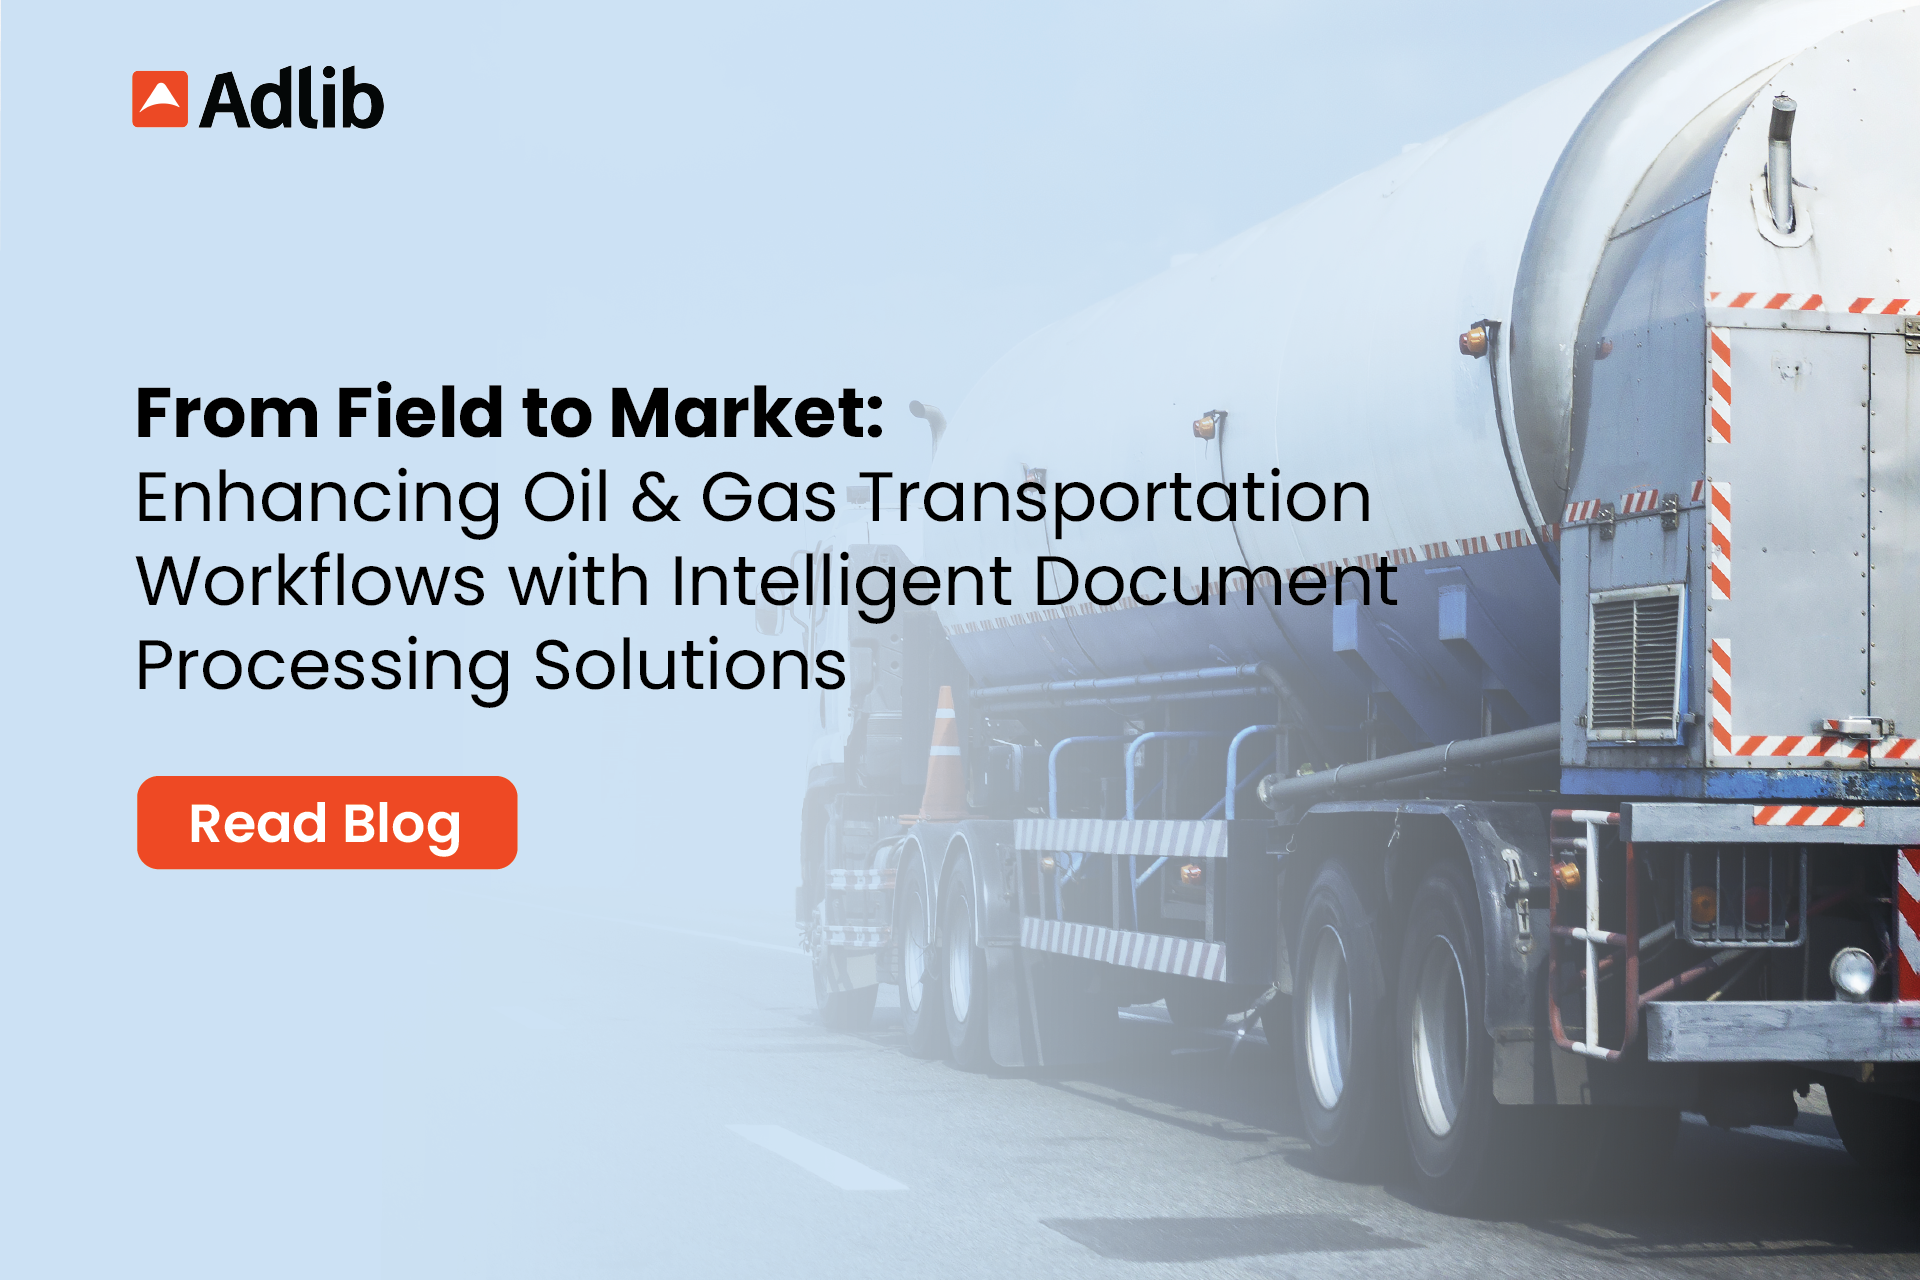 From Field to Market: Enhancing Oil & Gas Transportation and Storage Workflows with Intelligent Document Processing Solutions Featured Image